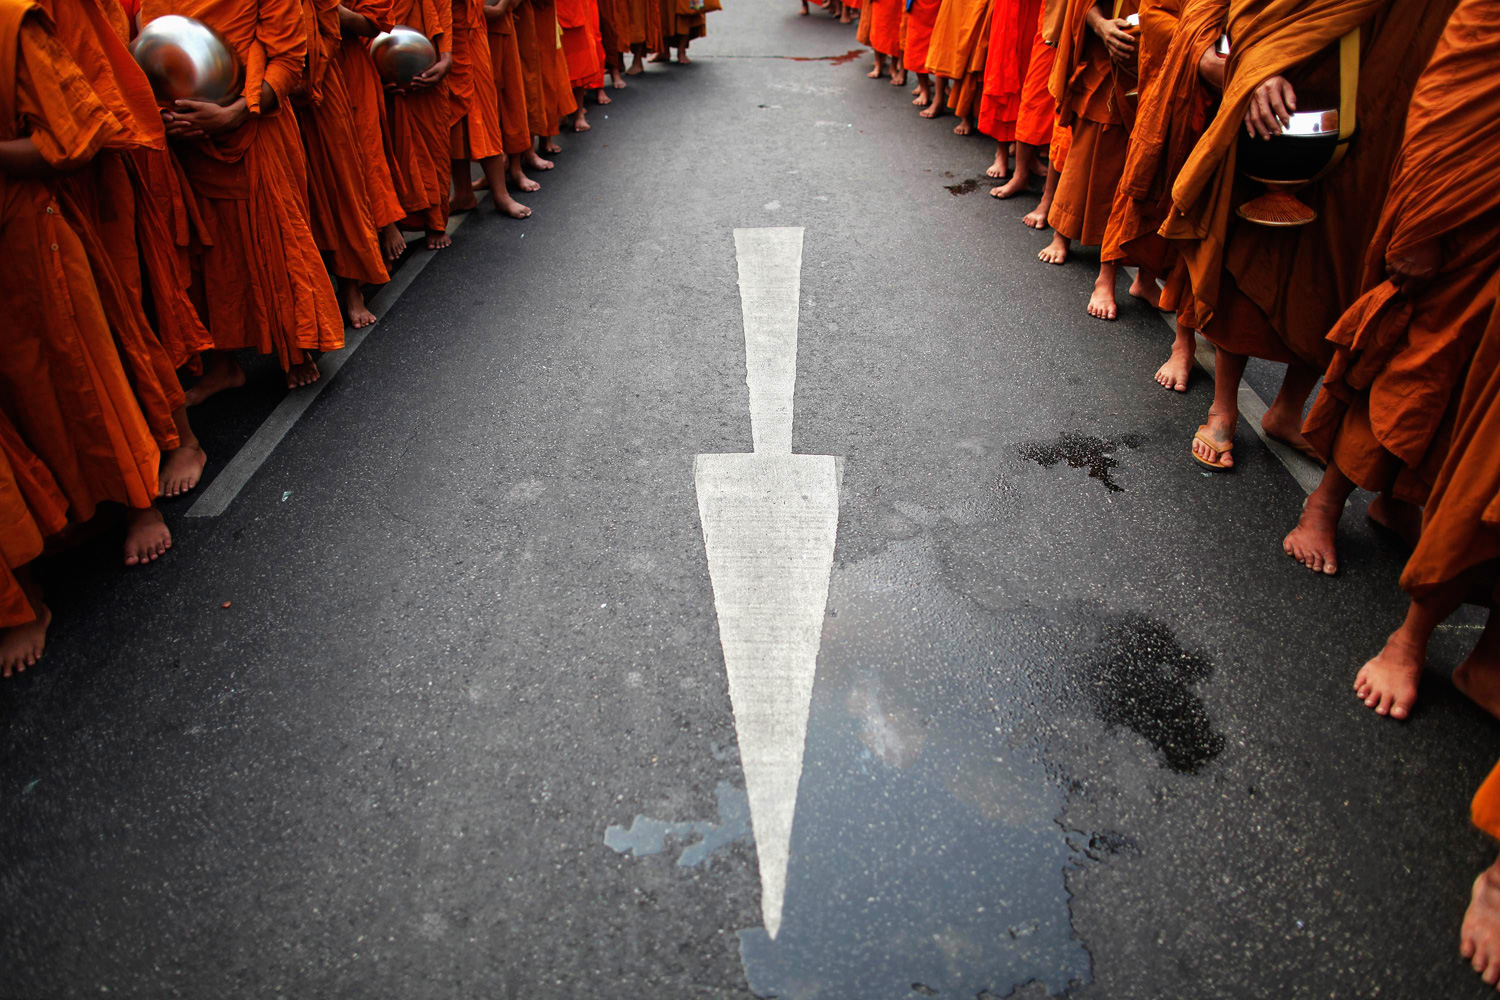 March 24, 2012. Some tens of thousands of Buddhist monks arrive for a mass alms-offering ceremony in Bangkok's Chinatown.